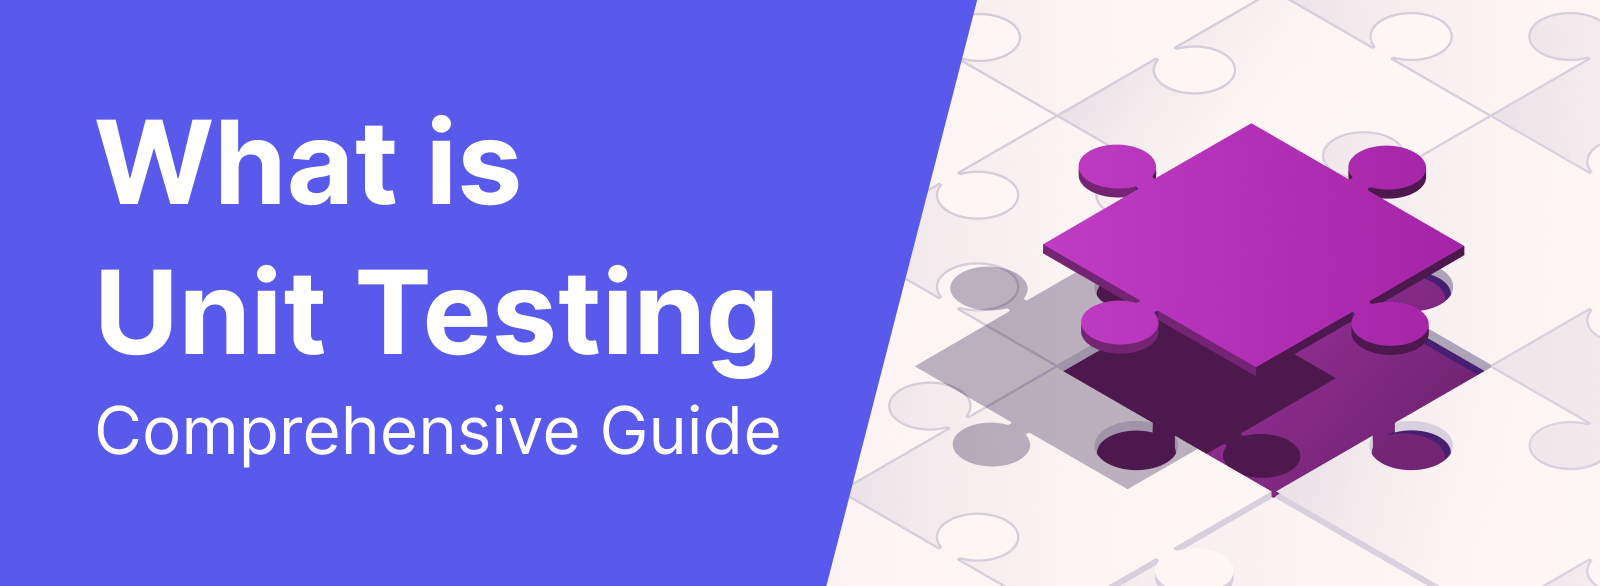 What is unit testing?